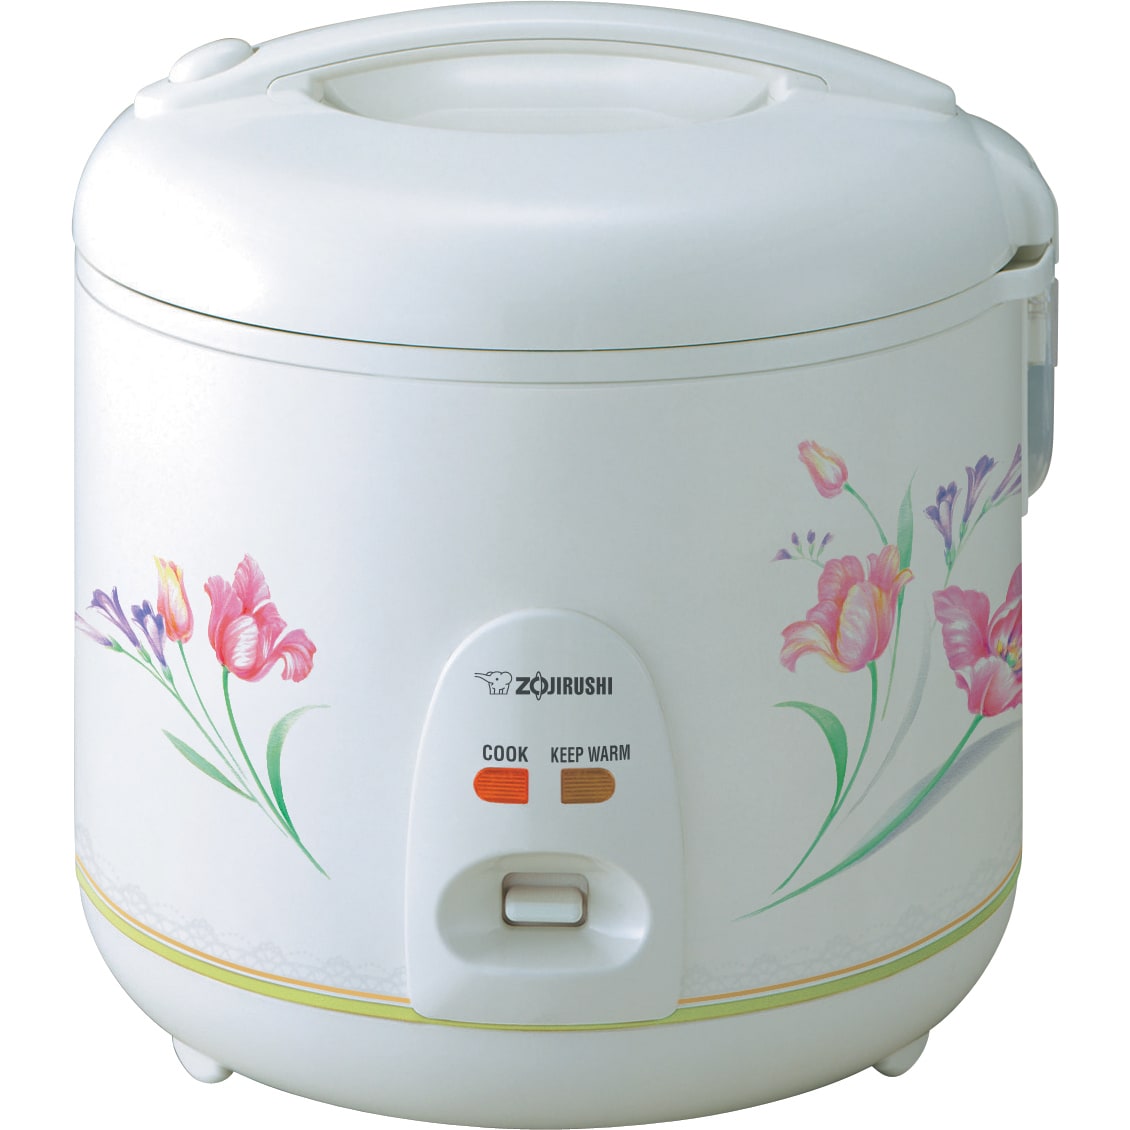 https://ak1.ostkcdn.com/images/products/13867210/Zojirushi-10-cup-Automatic-Rice-Cooker-and-Warmer-b3168095-62b5-42f5-818a-e6b3fcc350ef.jpg